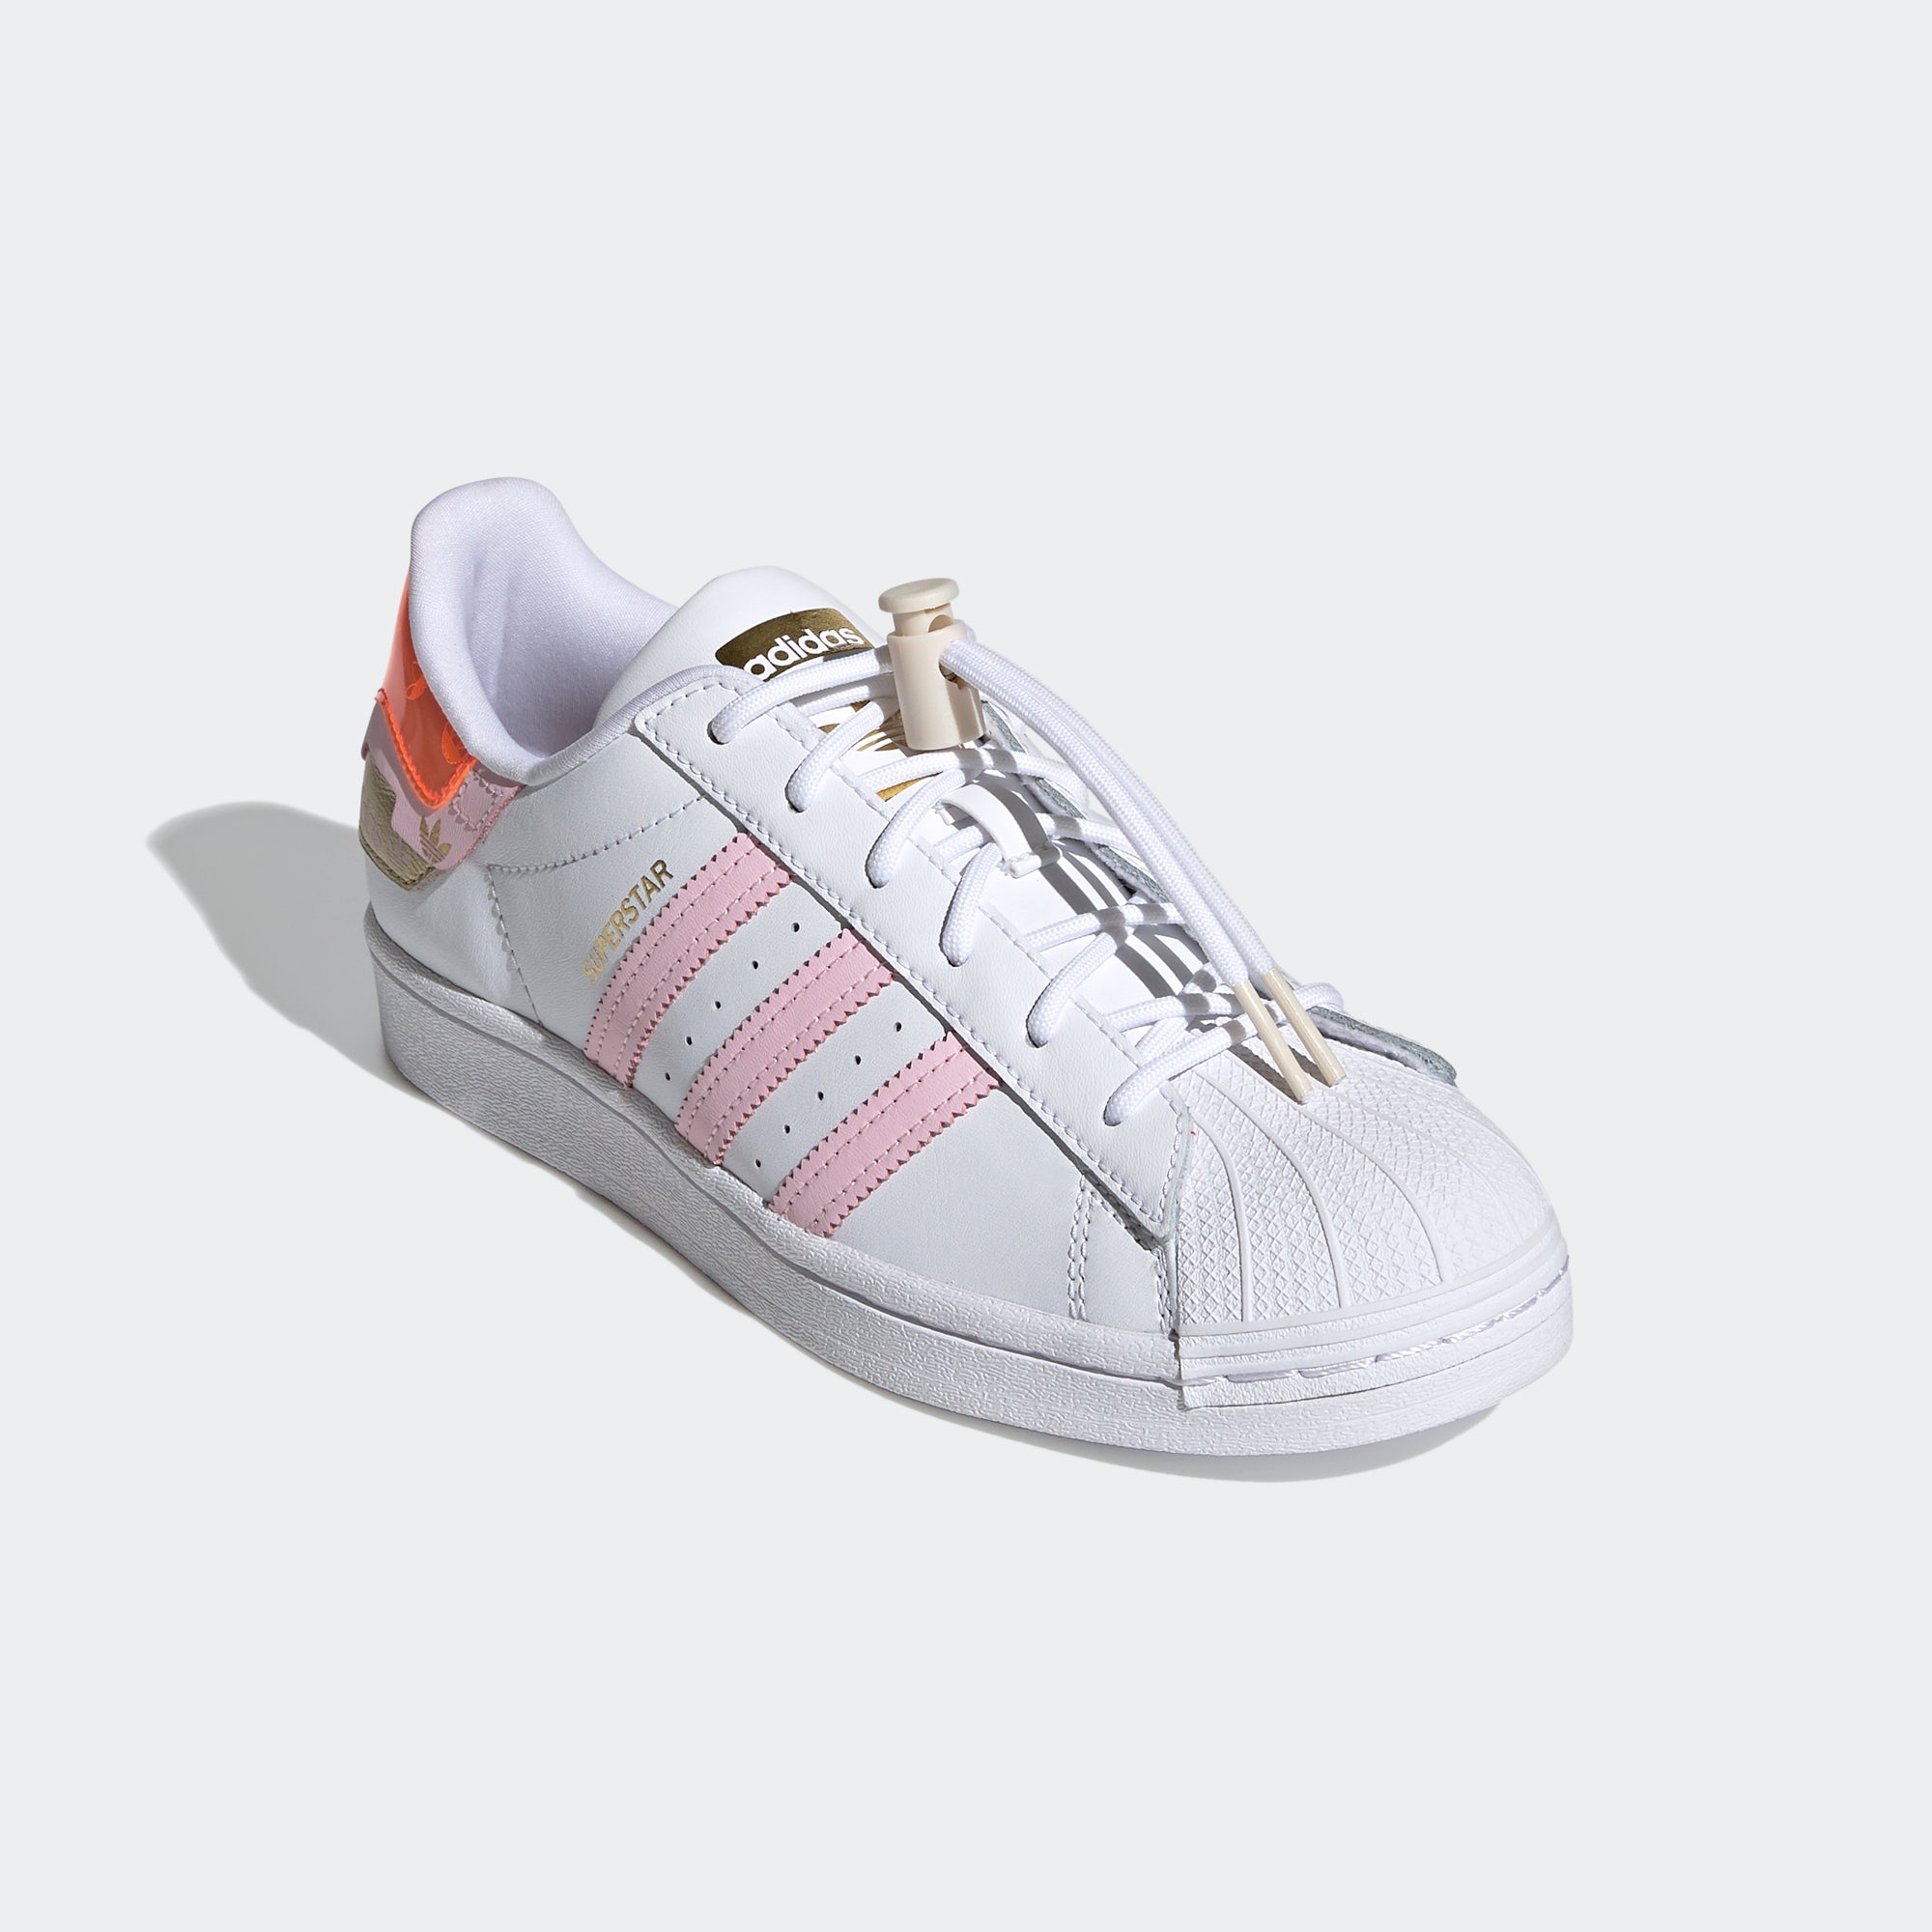 Puur Mevrouw Circus WMNS adidas Superstar Shoes White Toggle H00659 | Chicago City Sports